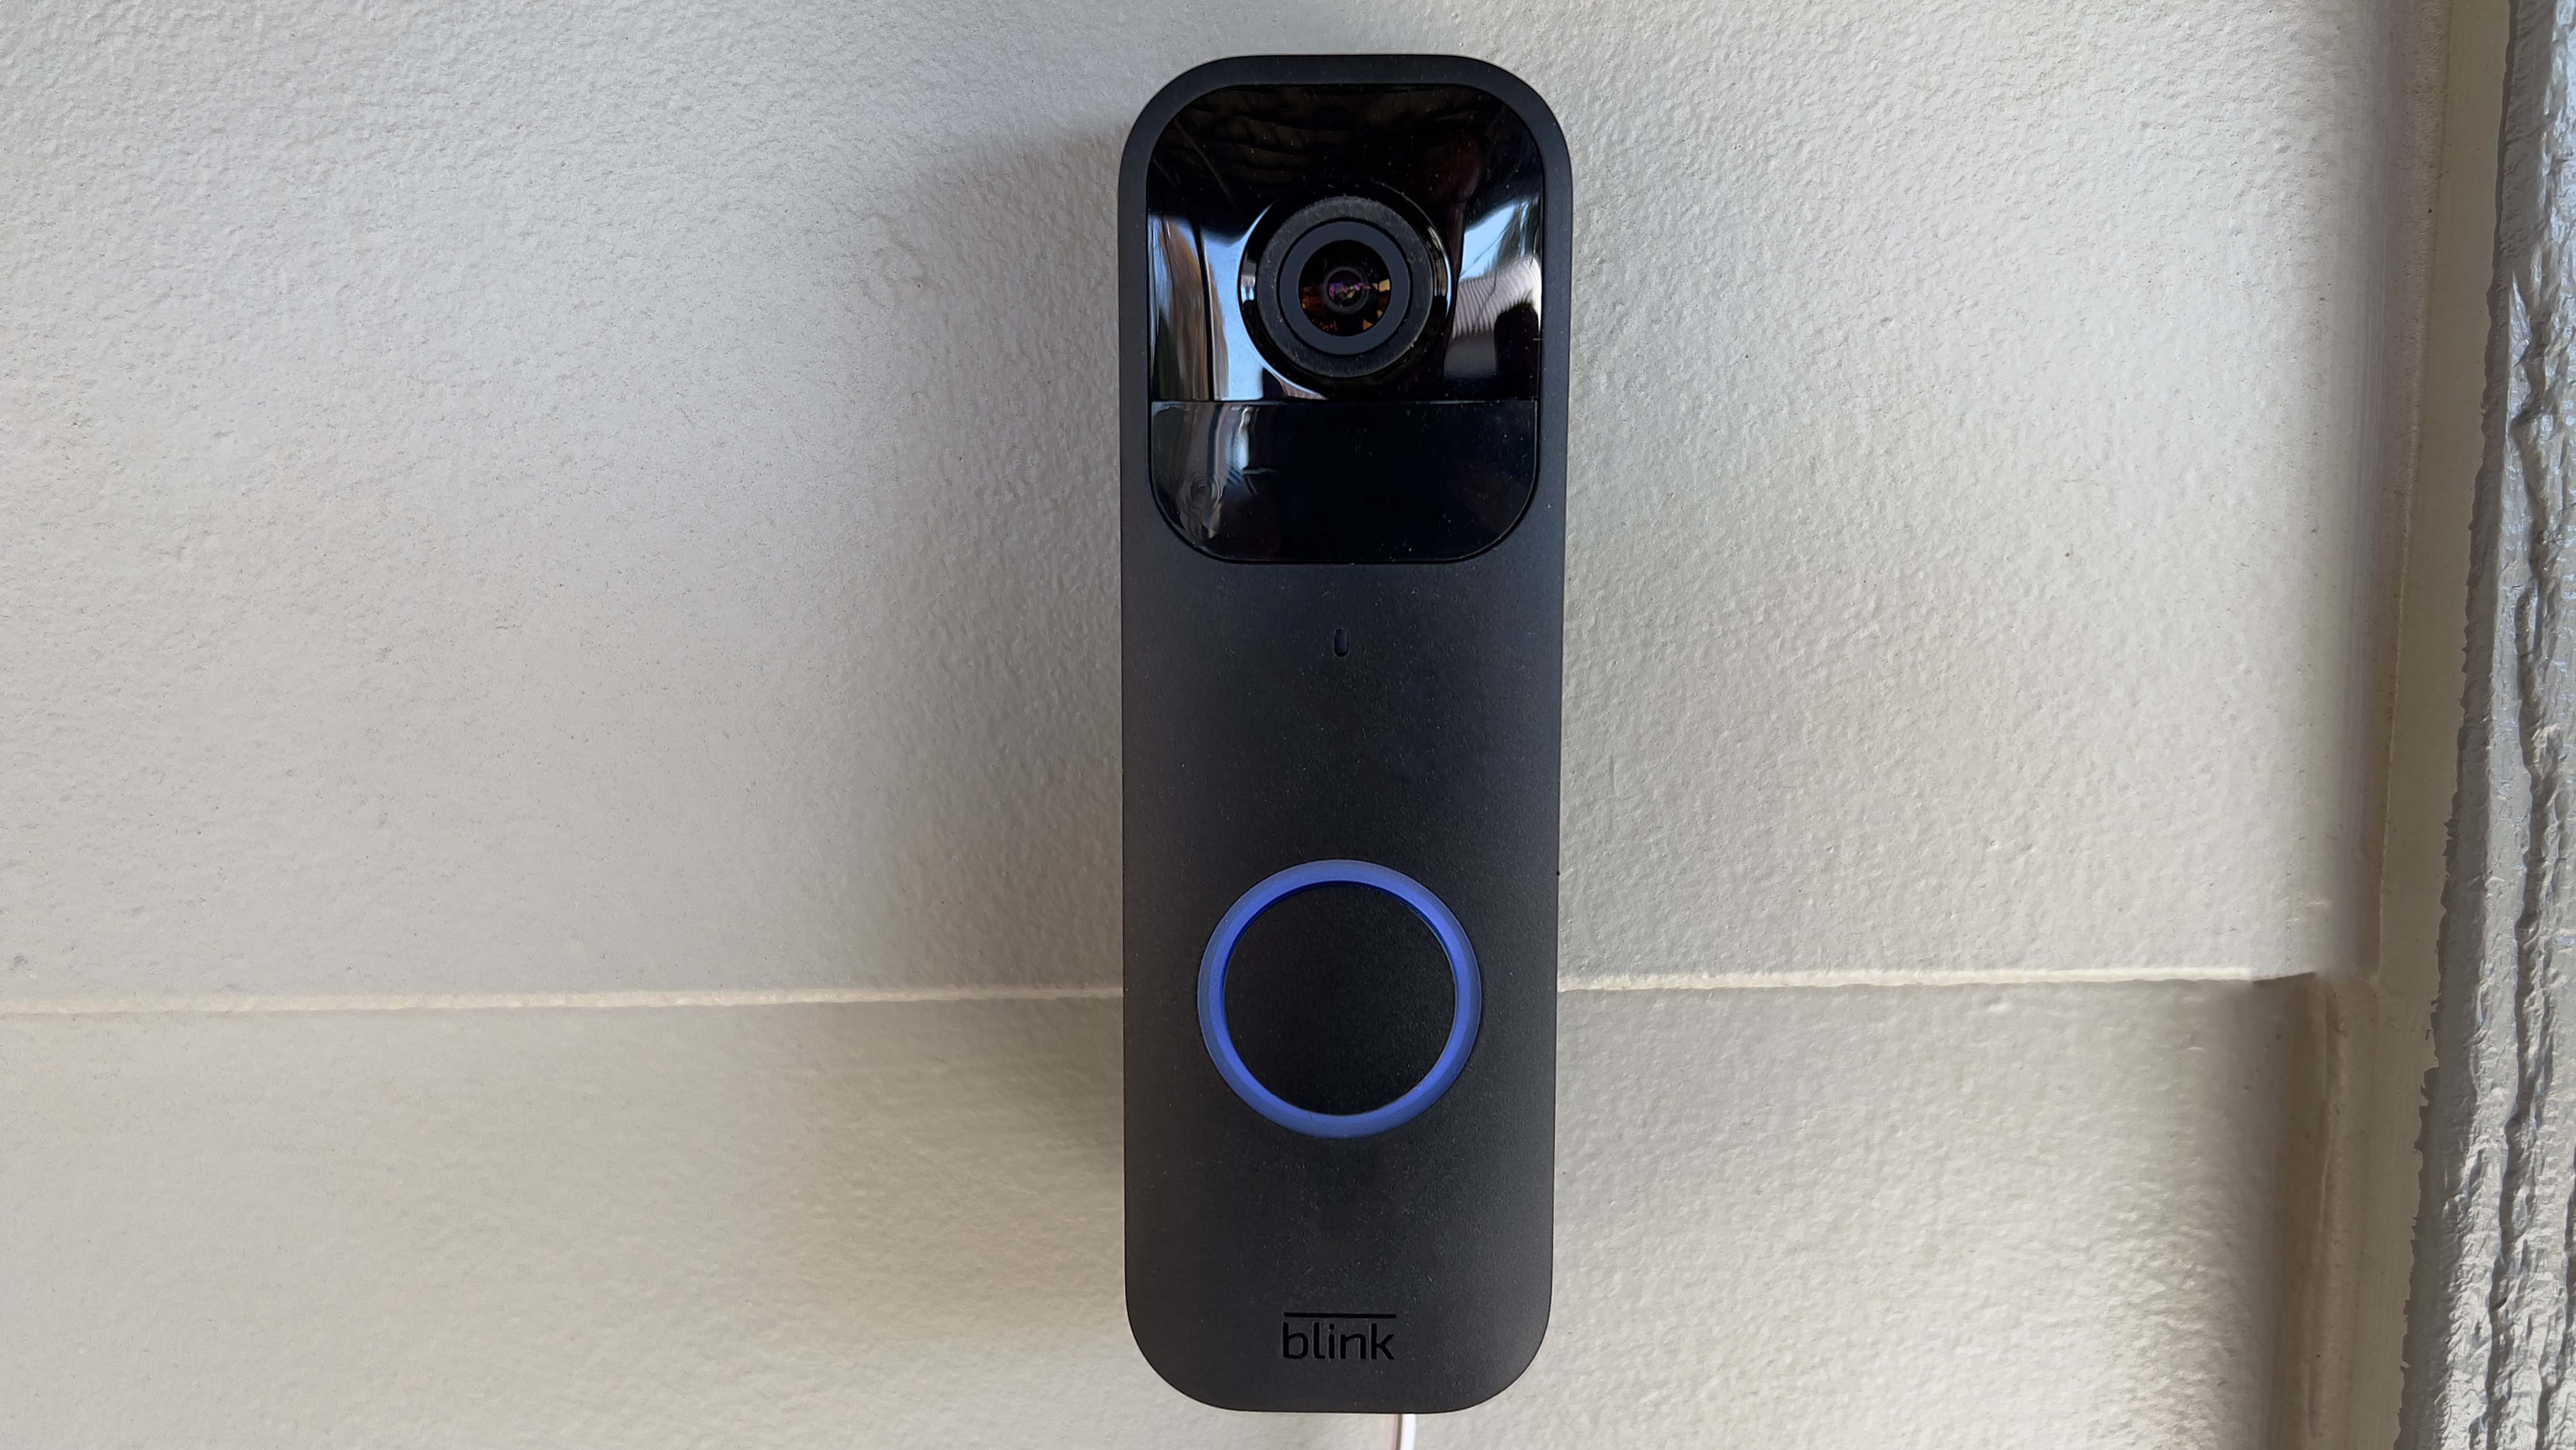 why blink doorbell won't connect to wifi